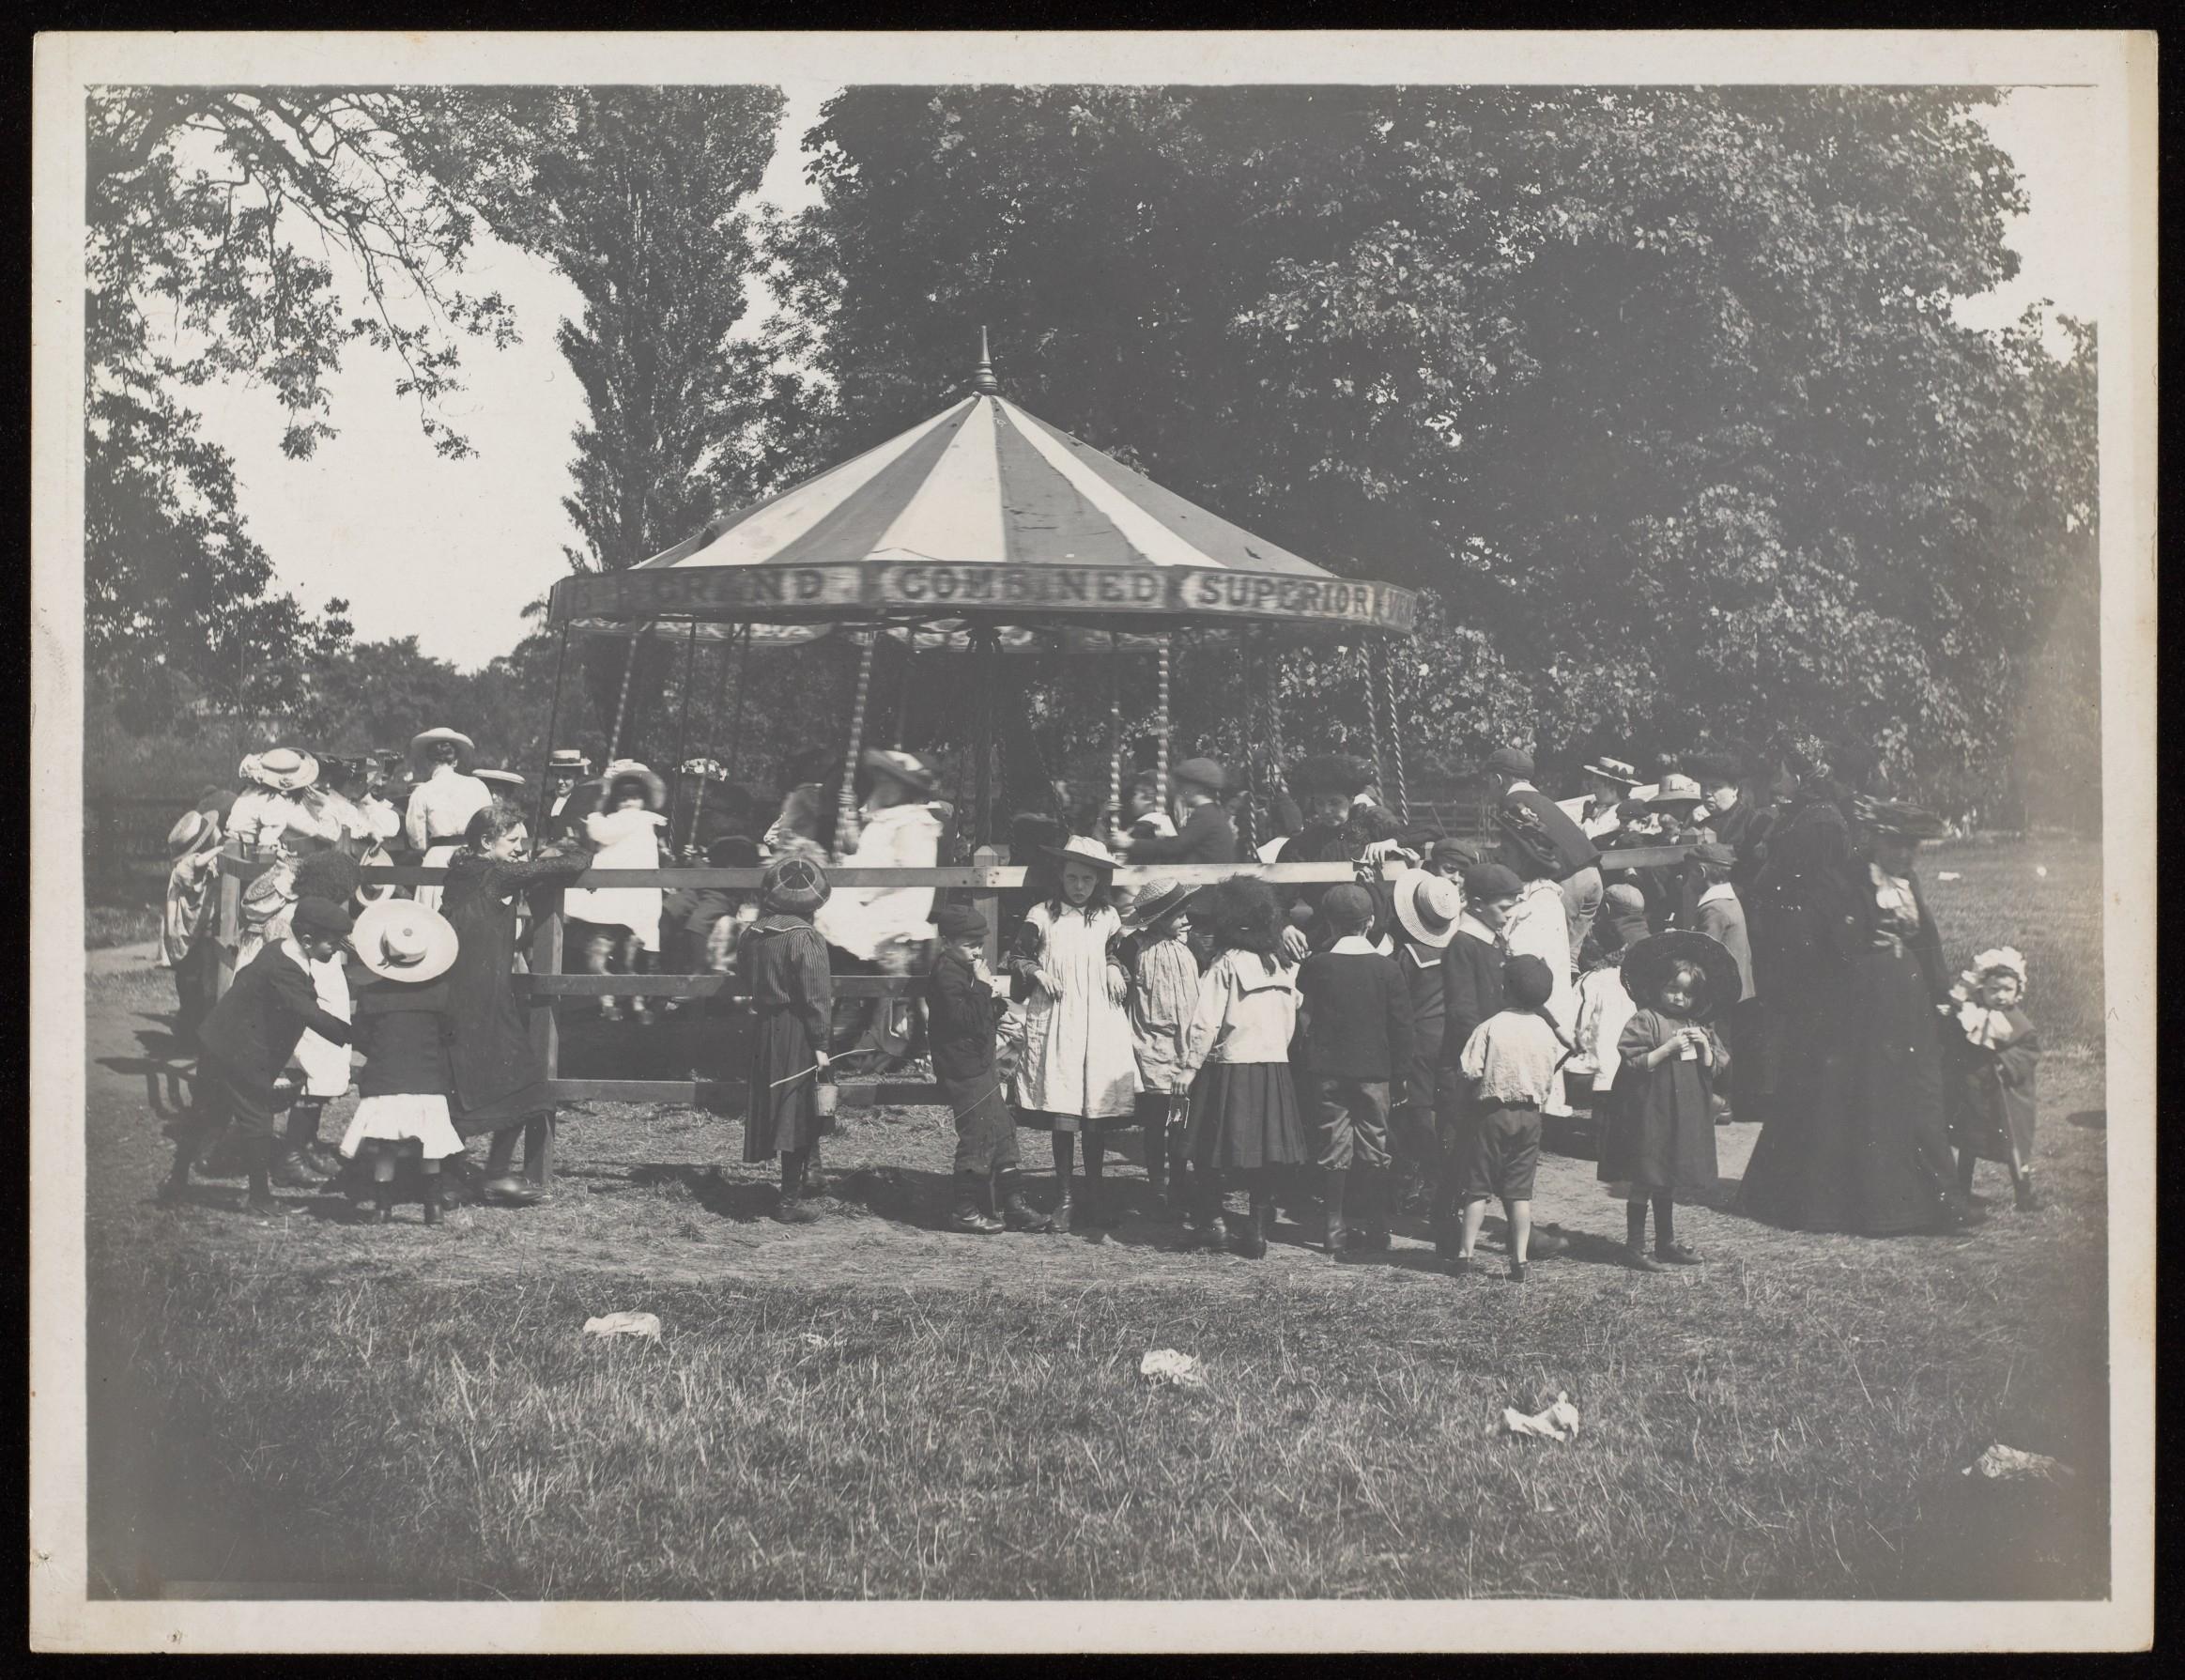 Communities in the Homestead Gardens in July 1904, the first summer Seebohm Rowntree opened it to the public.